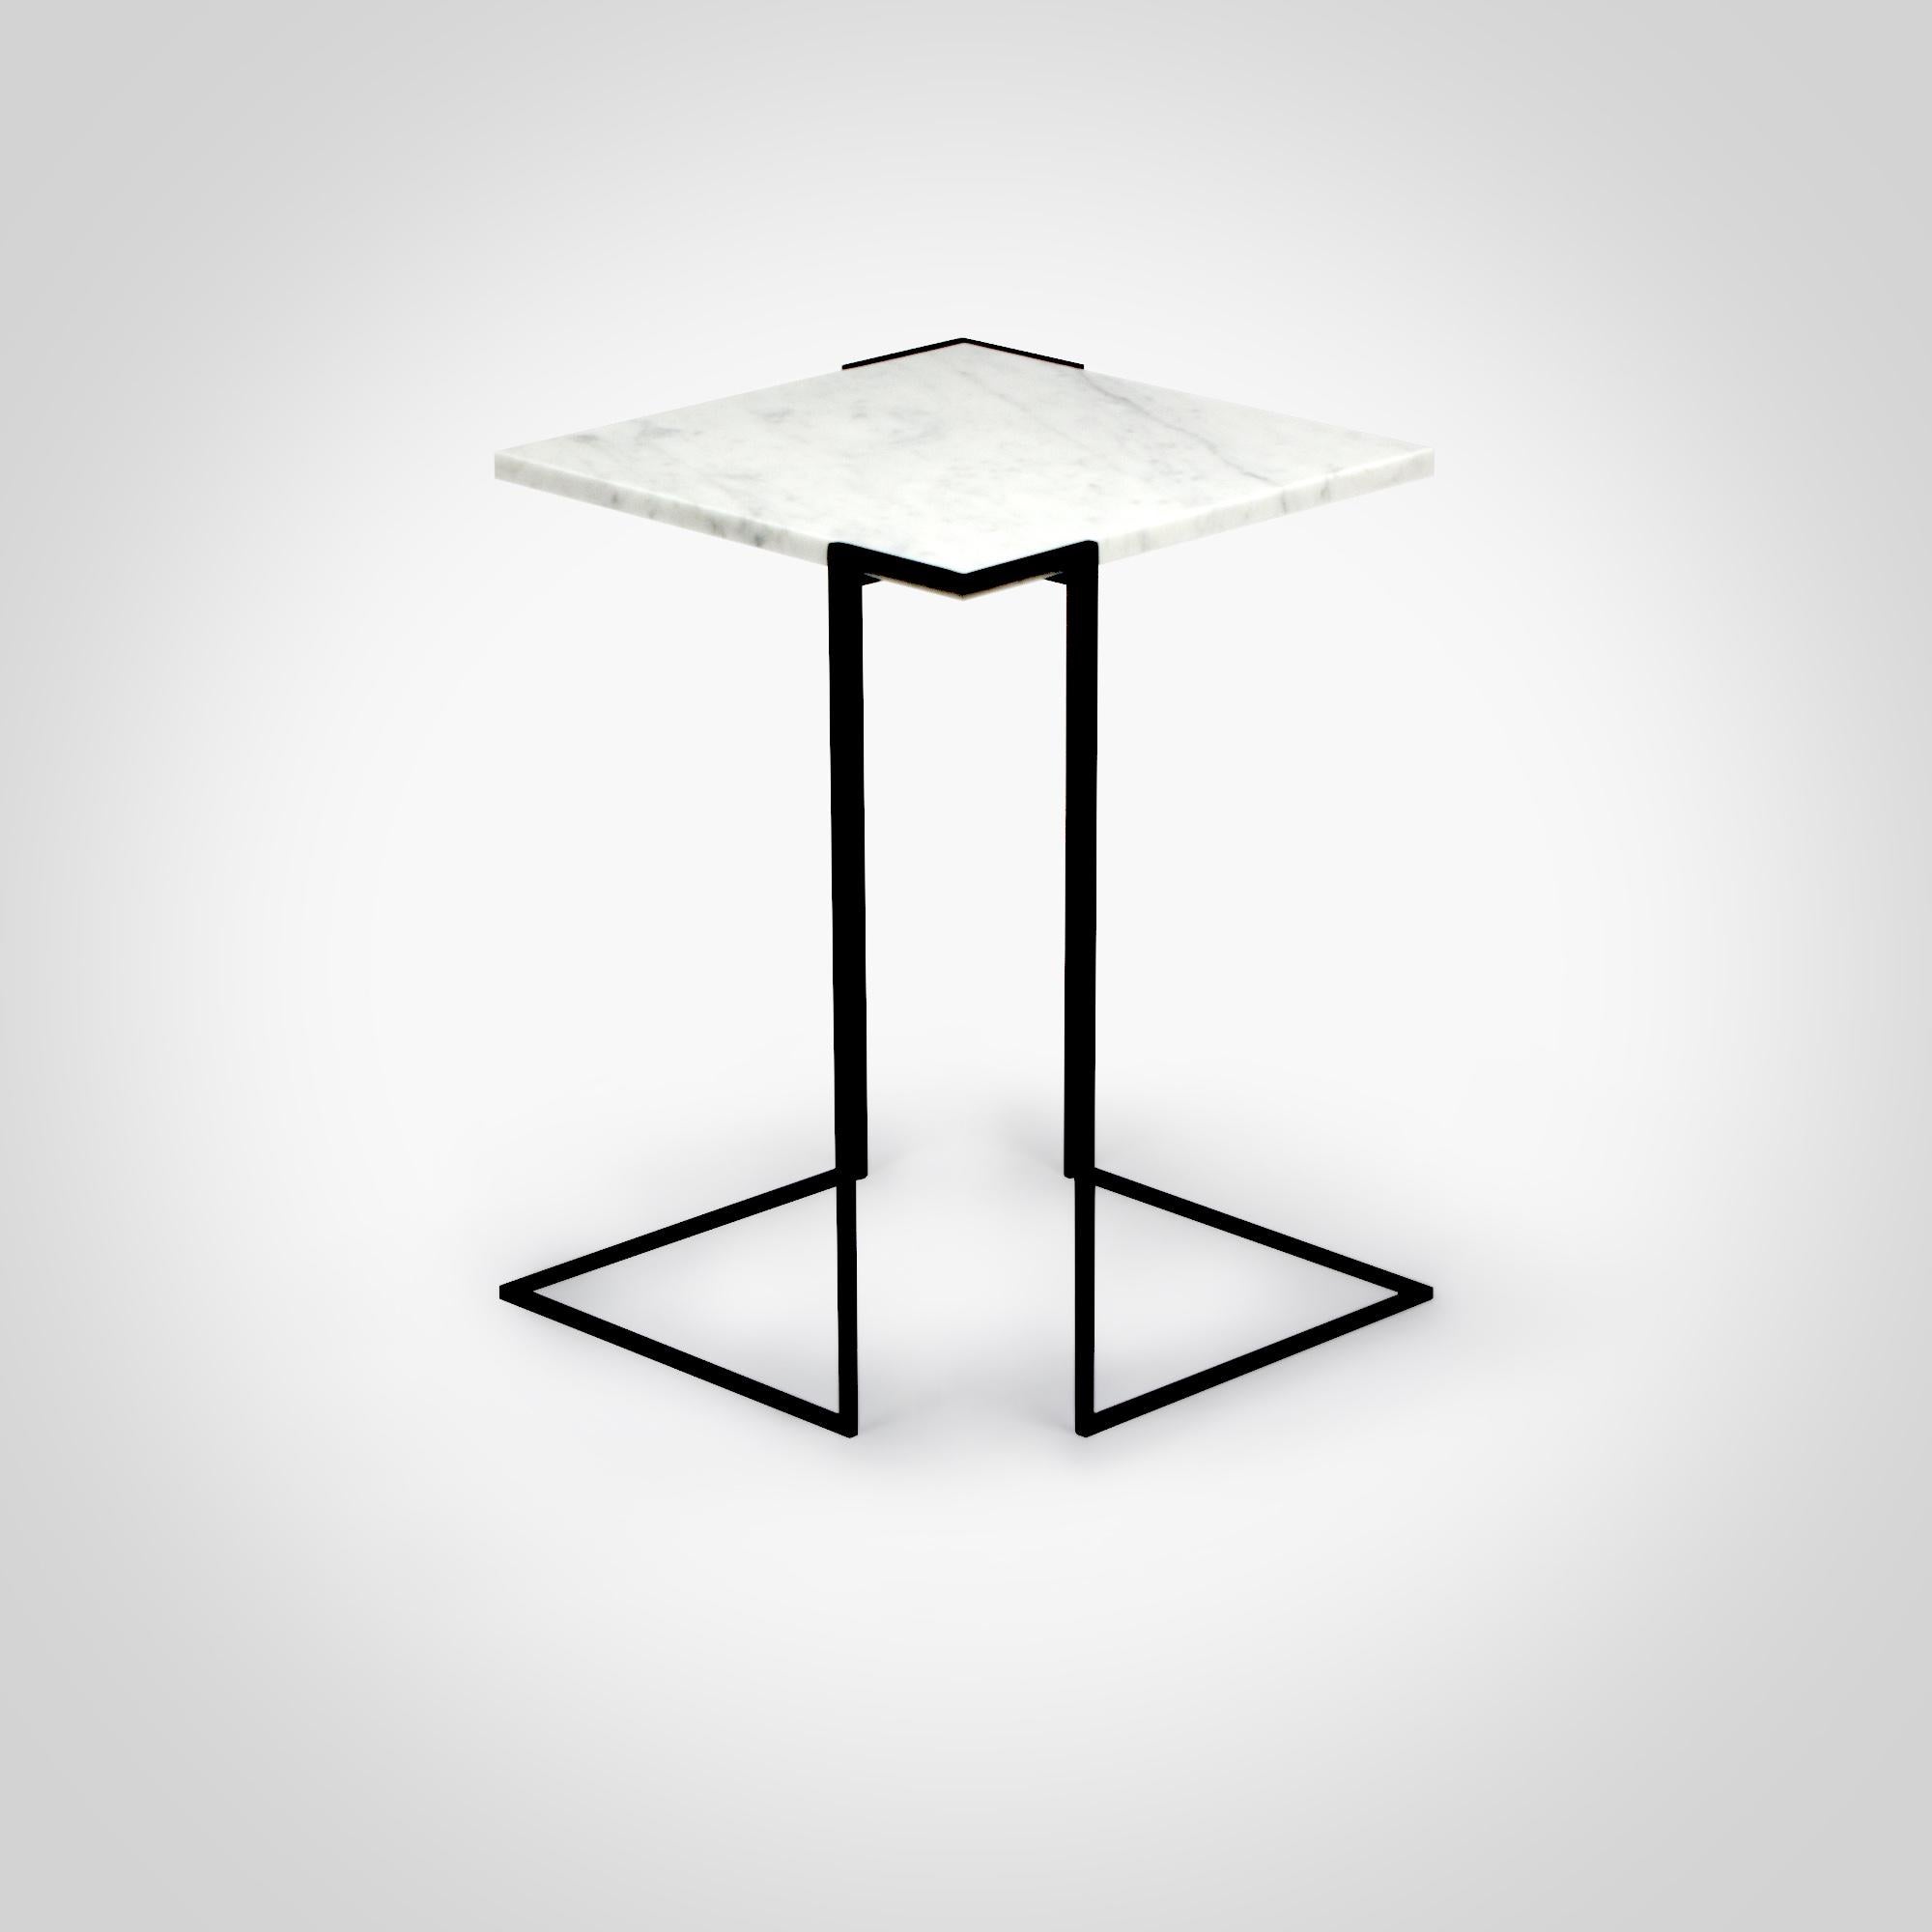 Italian GravitY, Carrara Marble Side Table By DFdesignlab Handmade in Italy For Sale